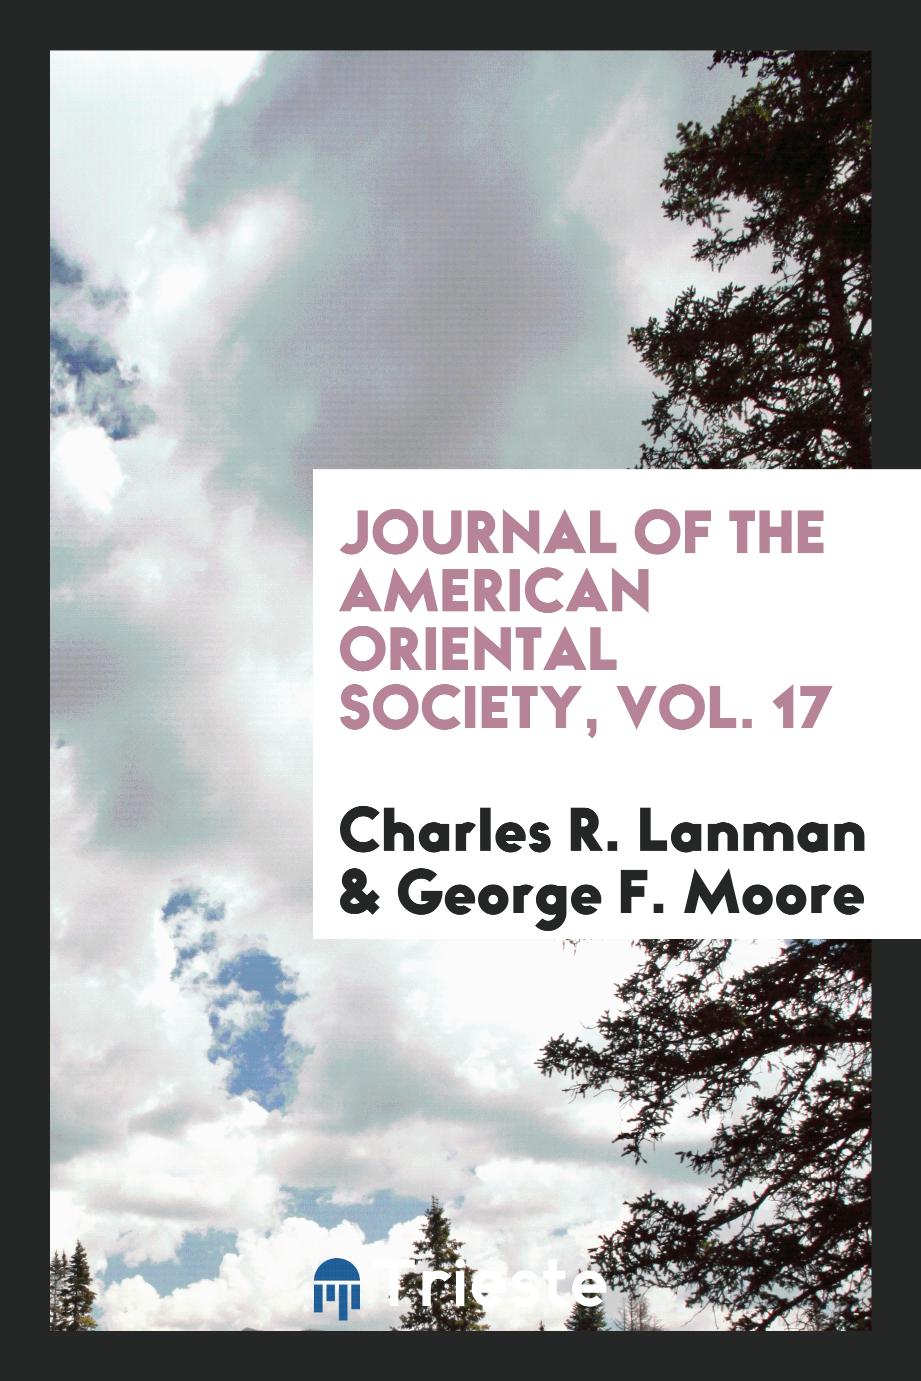 Journal of the American Oriental Society, Vol. 17